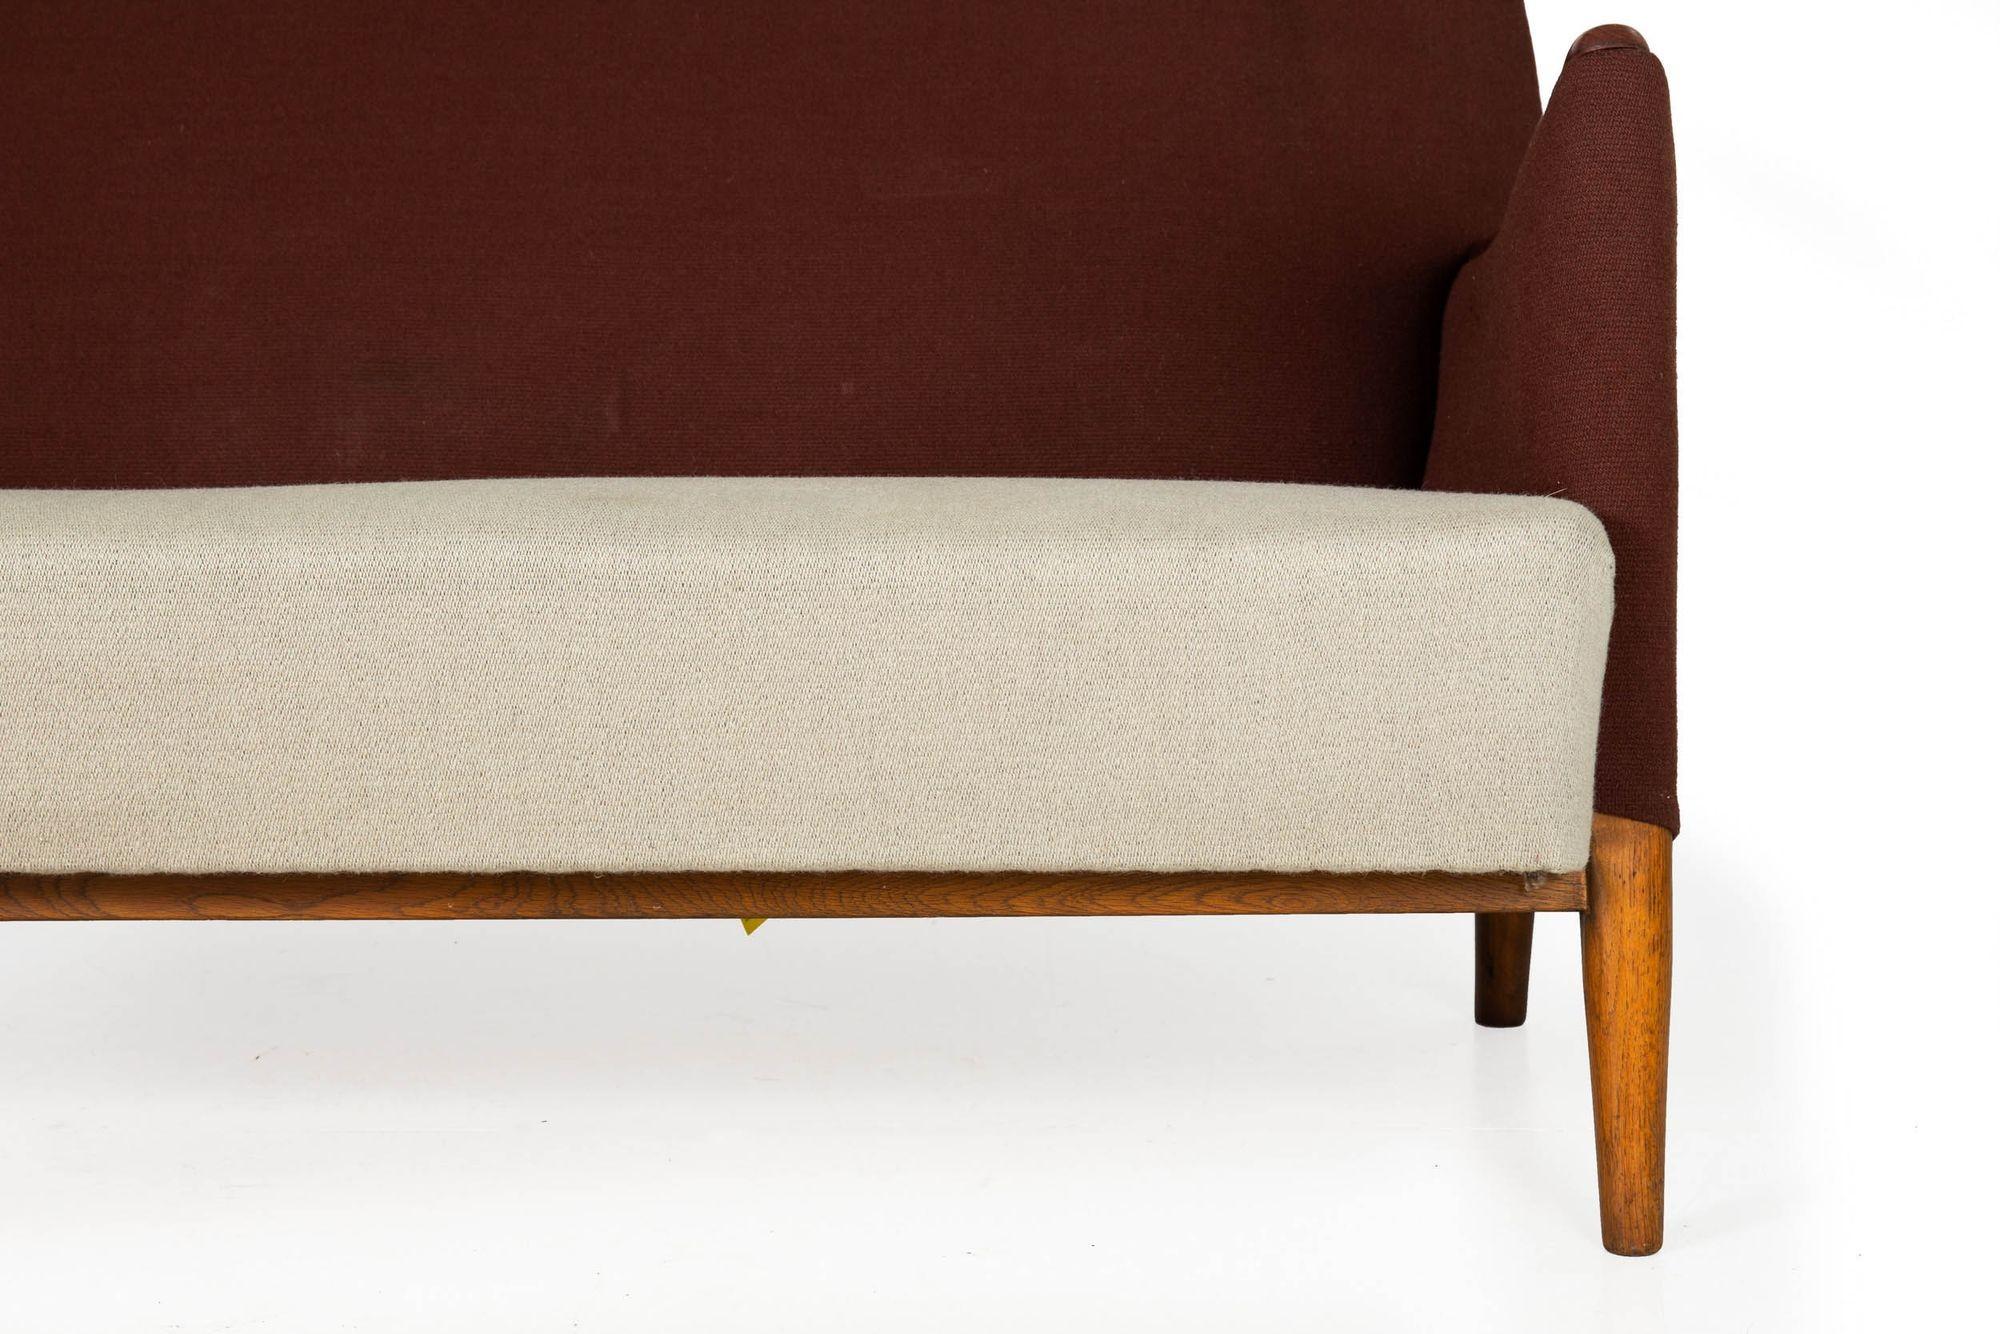 Danish Mid-Century Modern Sofa and Chair Set in Sculpted Teak, circa 1960 For Sale 12